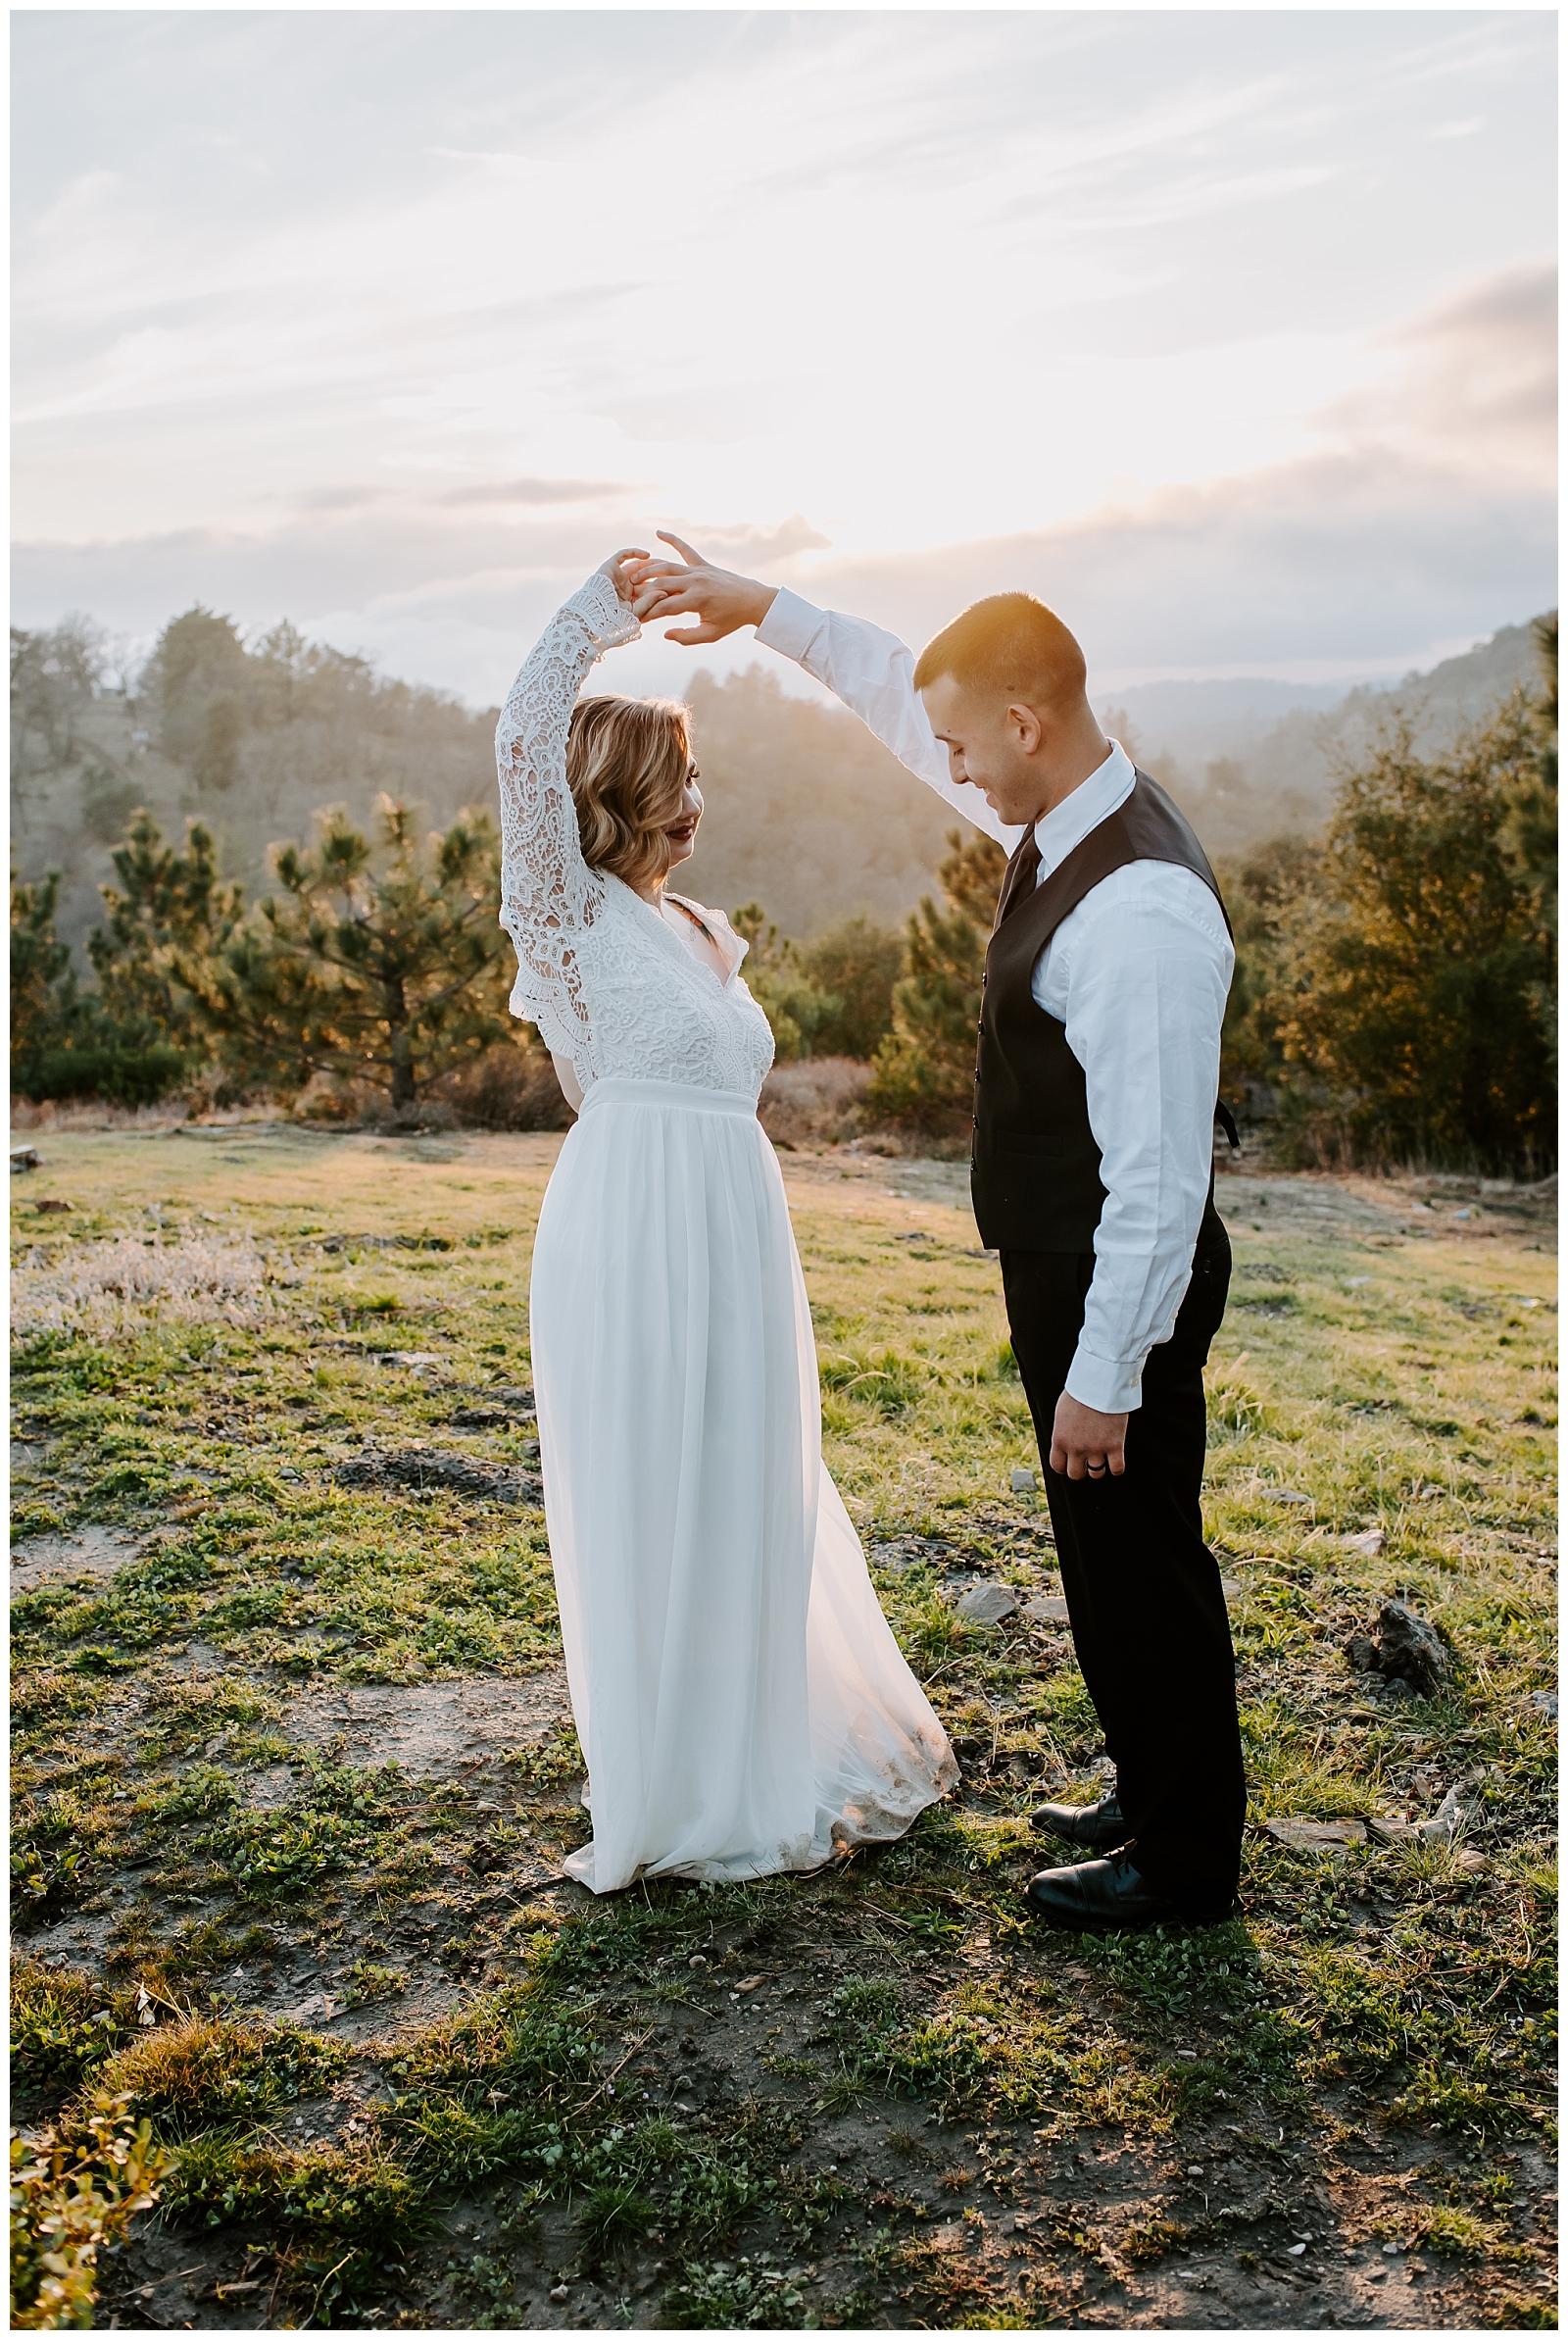 Bride and groom share a first dance at sunset during their elopement